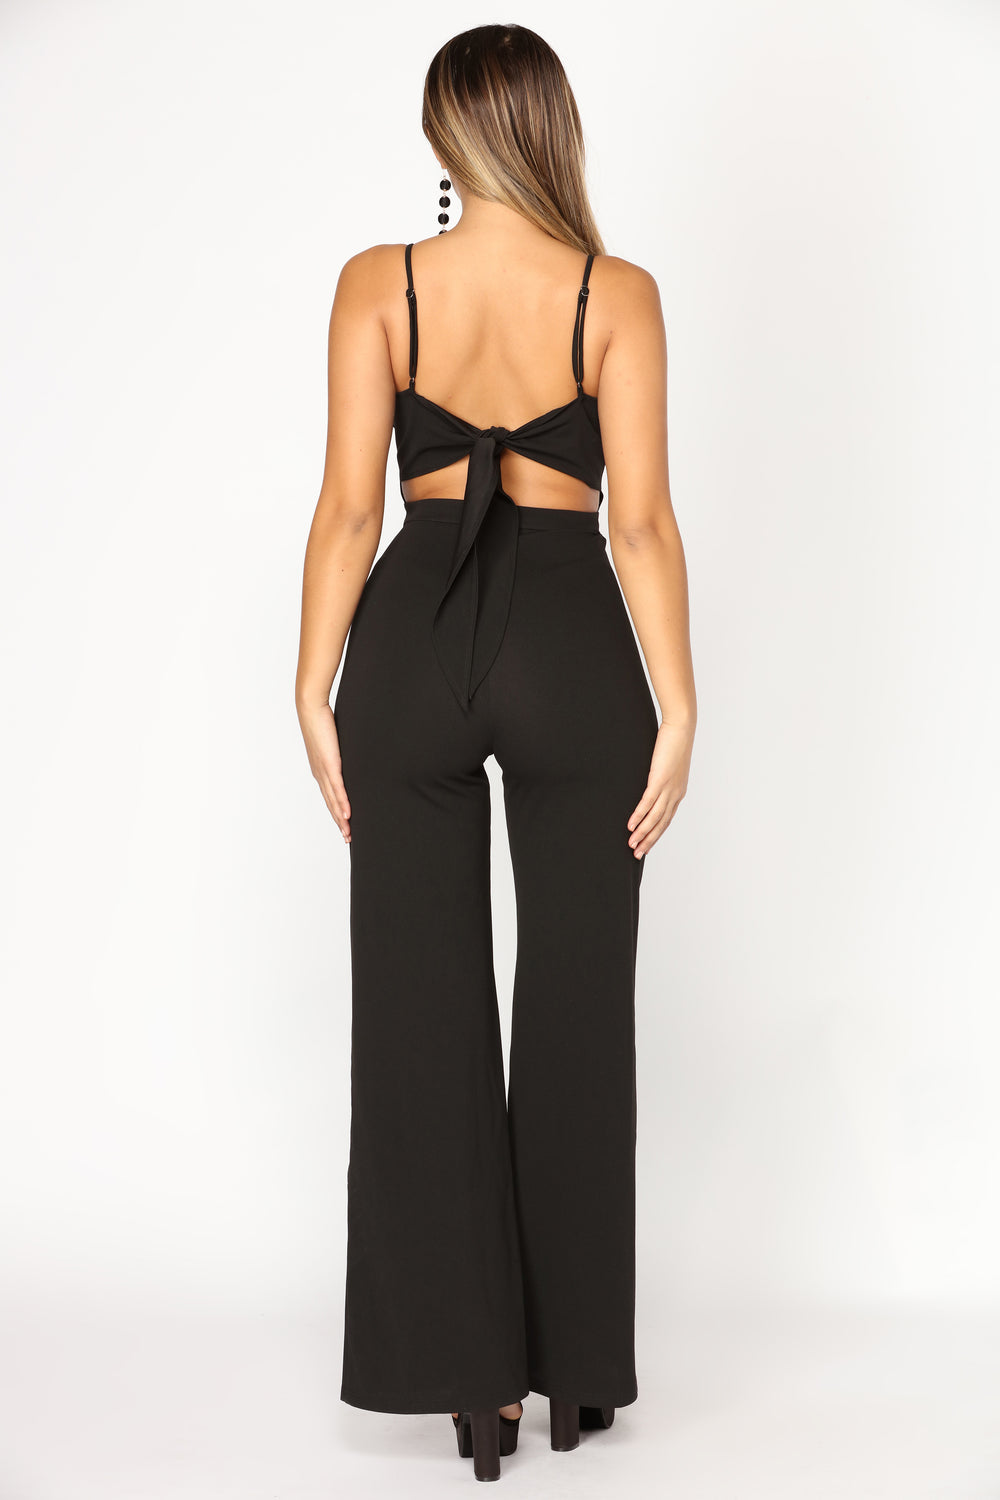 Bright Side Embroidered Jumpsuit - Black